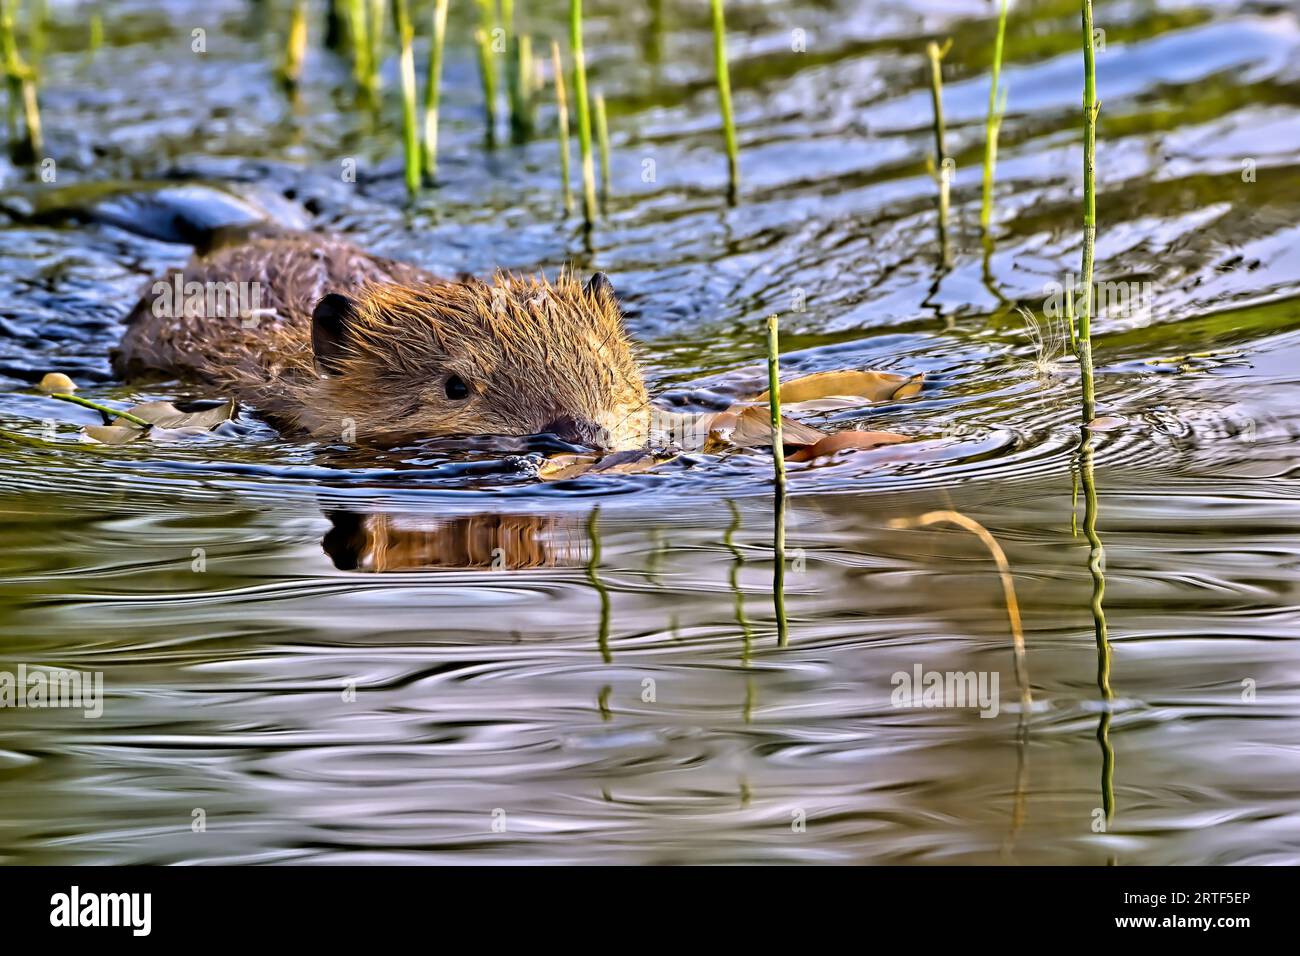 A wild baby Canadian beaver 'Castor canadensis', swimming through the tall marsh grass in a rural Alberta lale. Stock Photo